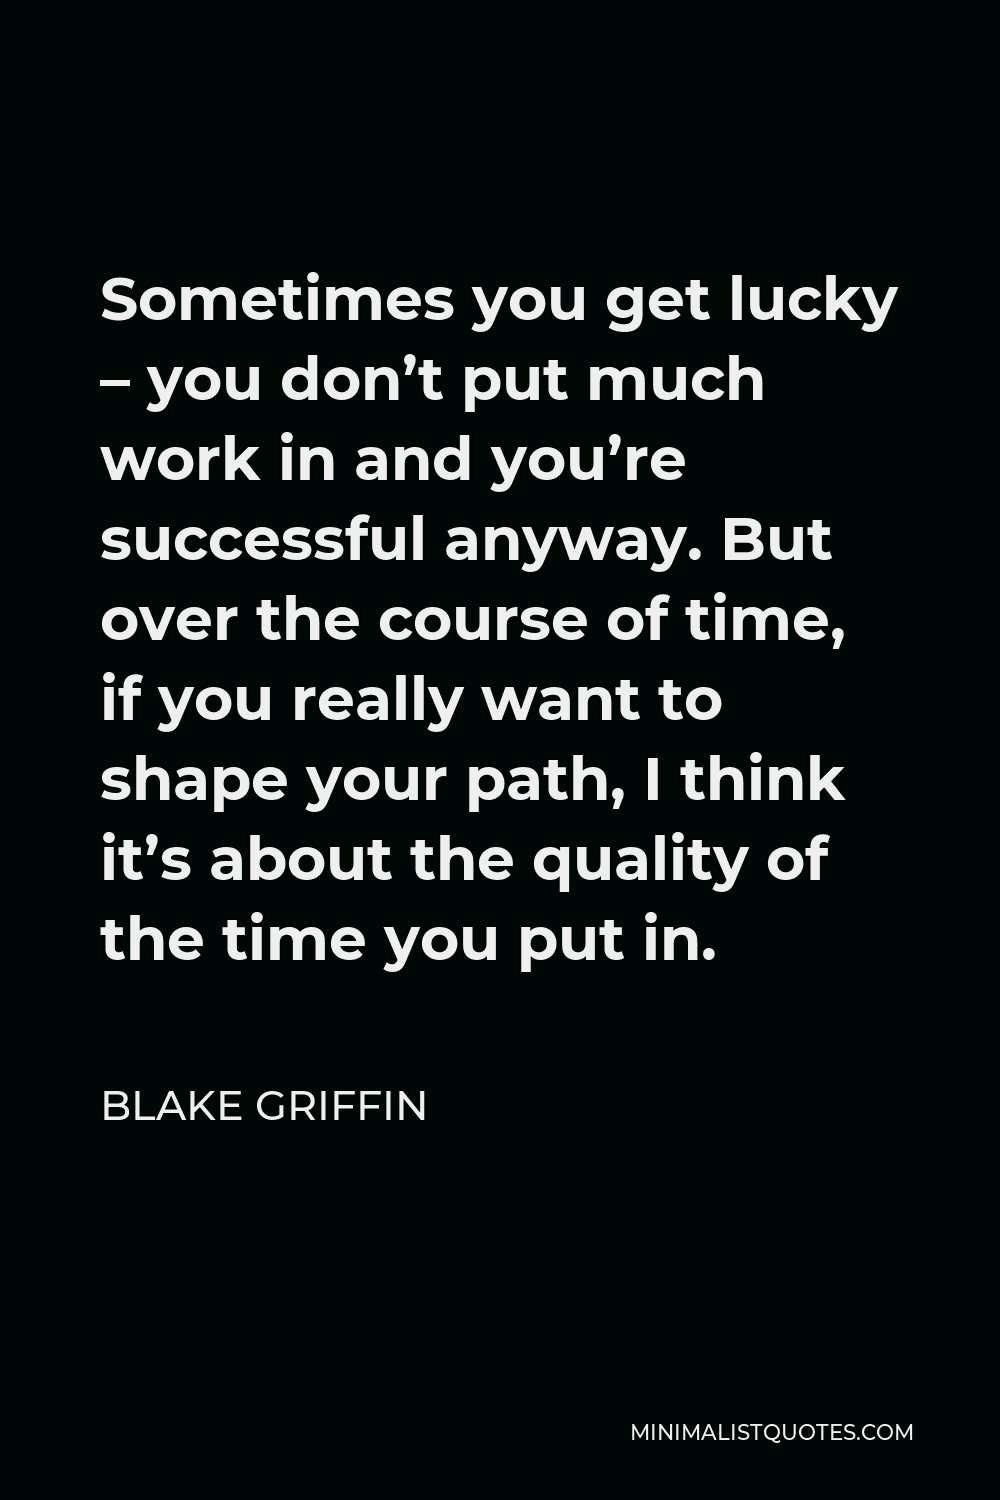 Blake Griffin Quote - Sometimes you get lucky – you don’t put much work in and you’re successful anyway. But over the course of time, if you really want to shape your path, I think it’s about the quality of the time you put in.